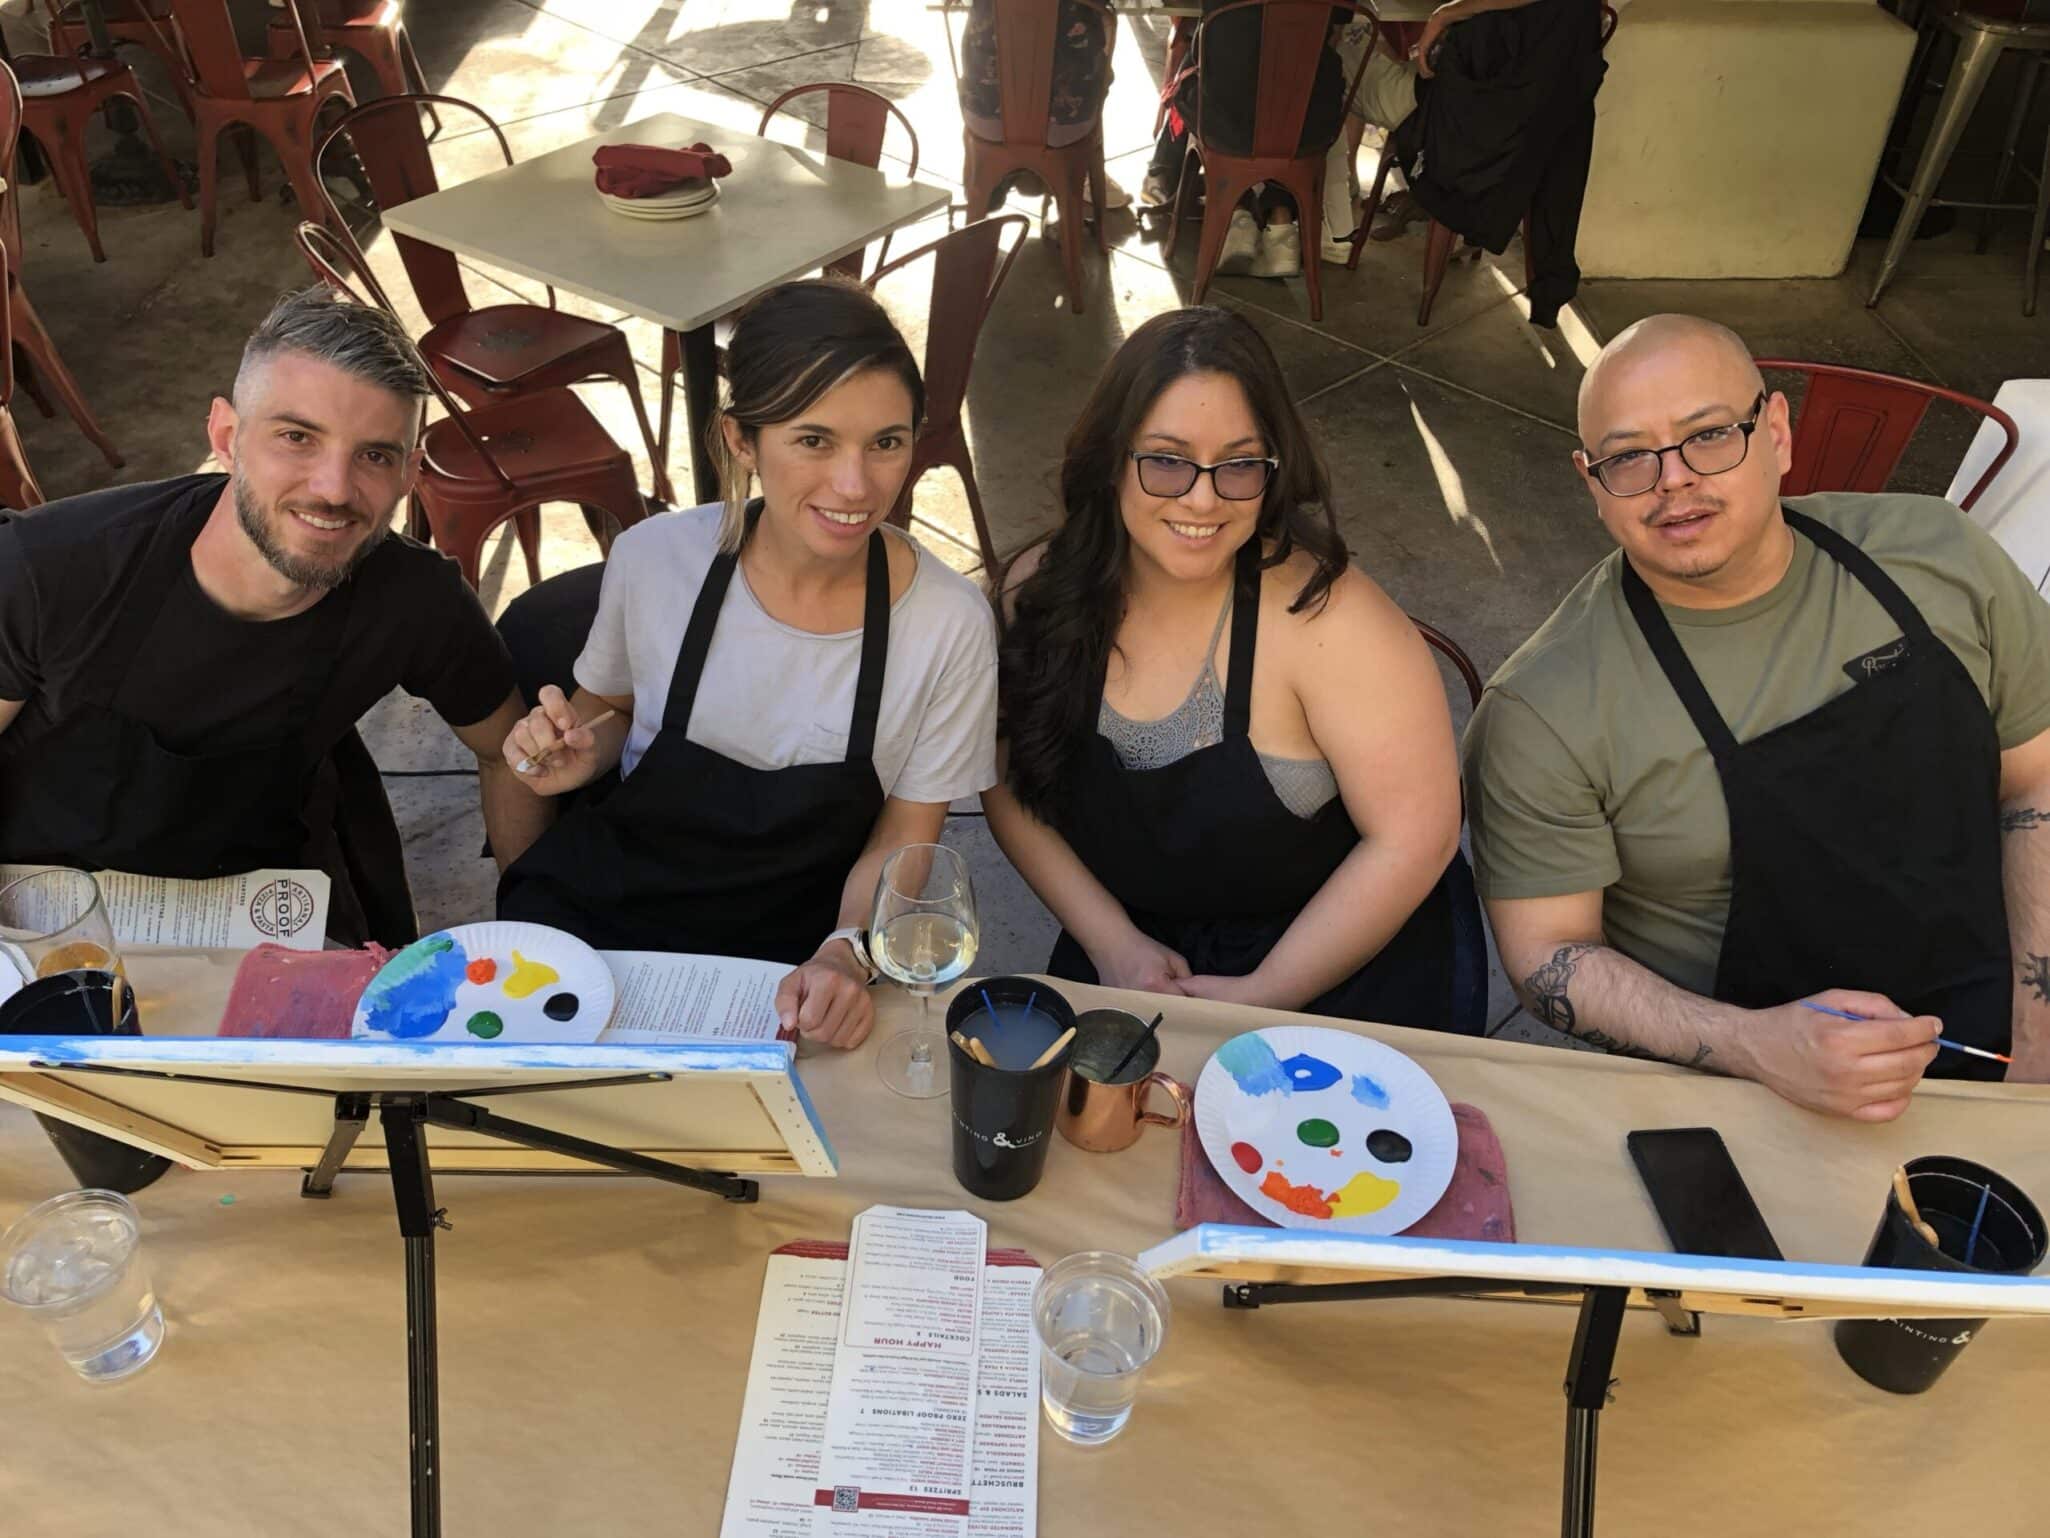 We serve Tucson and surrounding areas for public and private paint events, kids’ birthdays, and more!